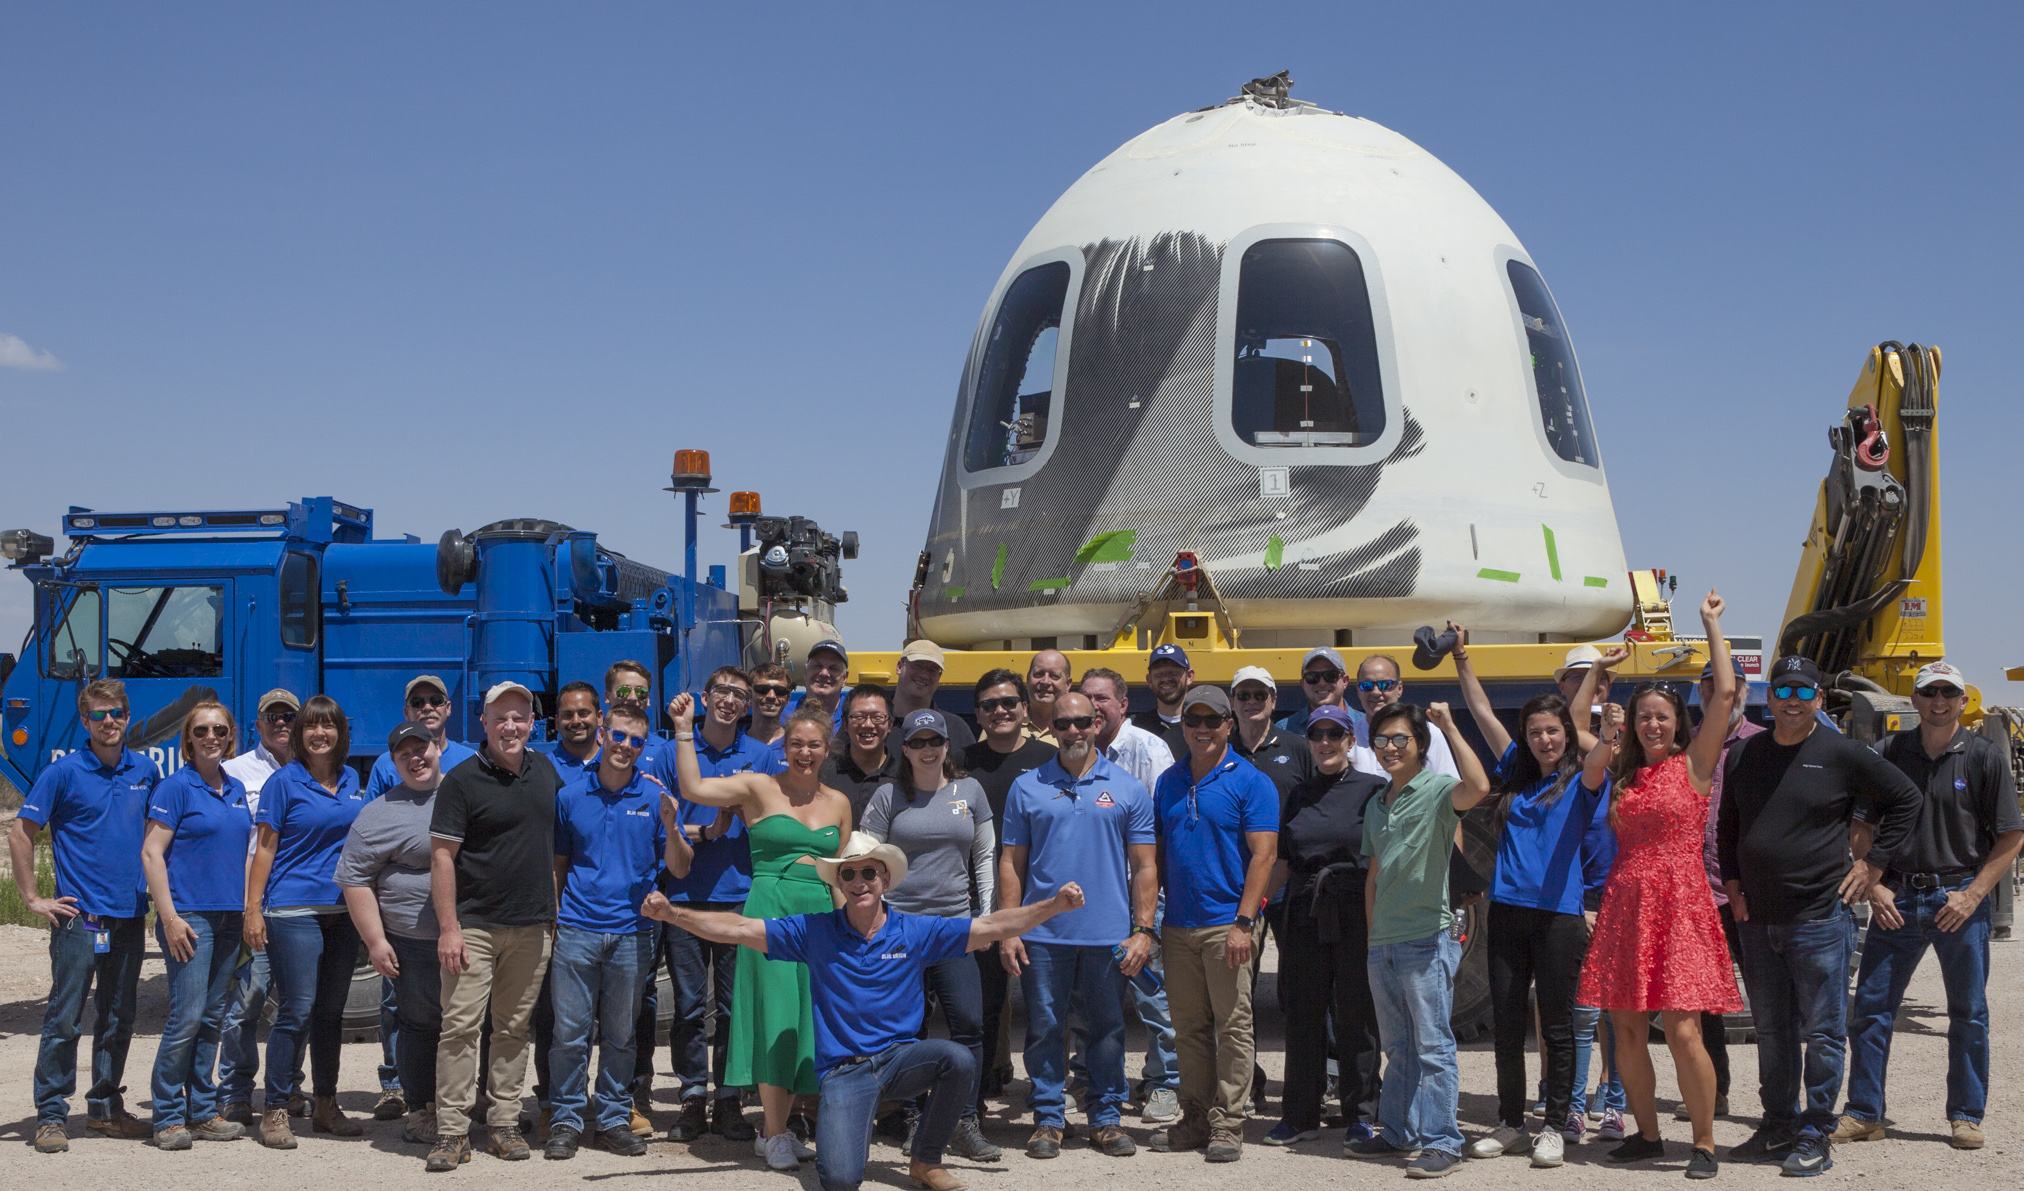 Research teams from NASA’s Flight Opportunities program pose in front of the Blue Origin capsule.